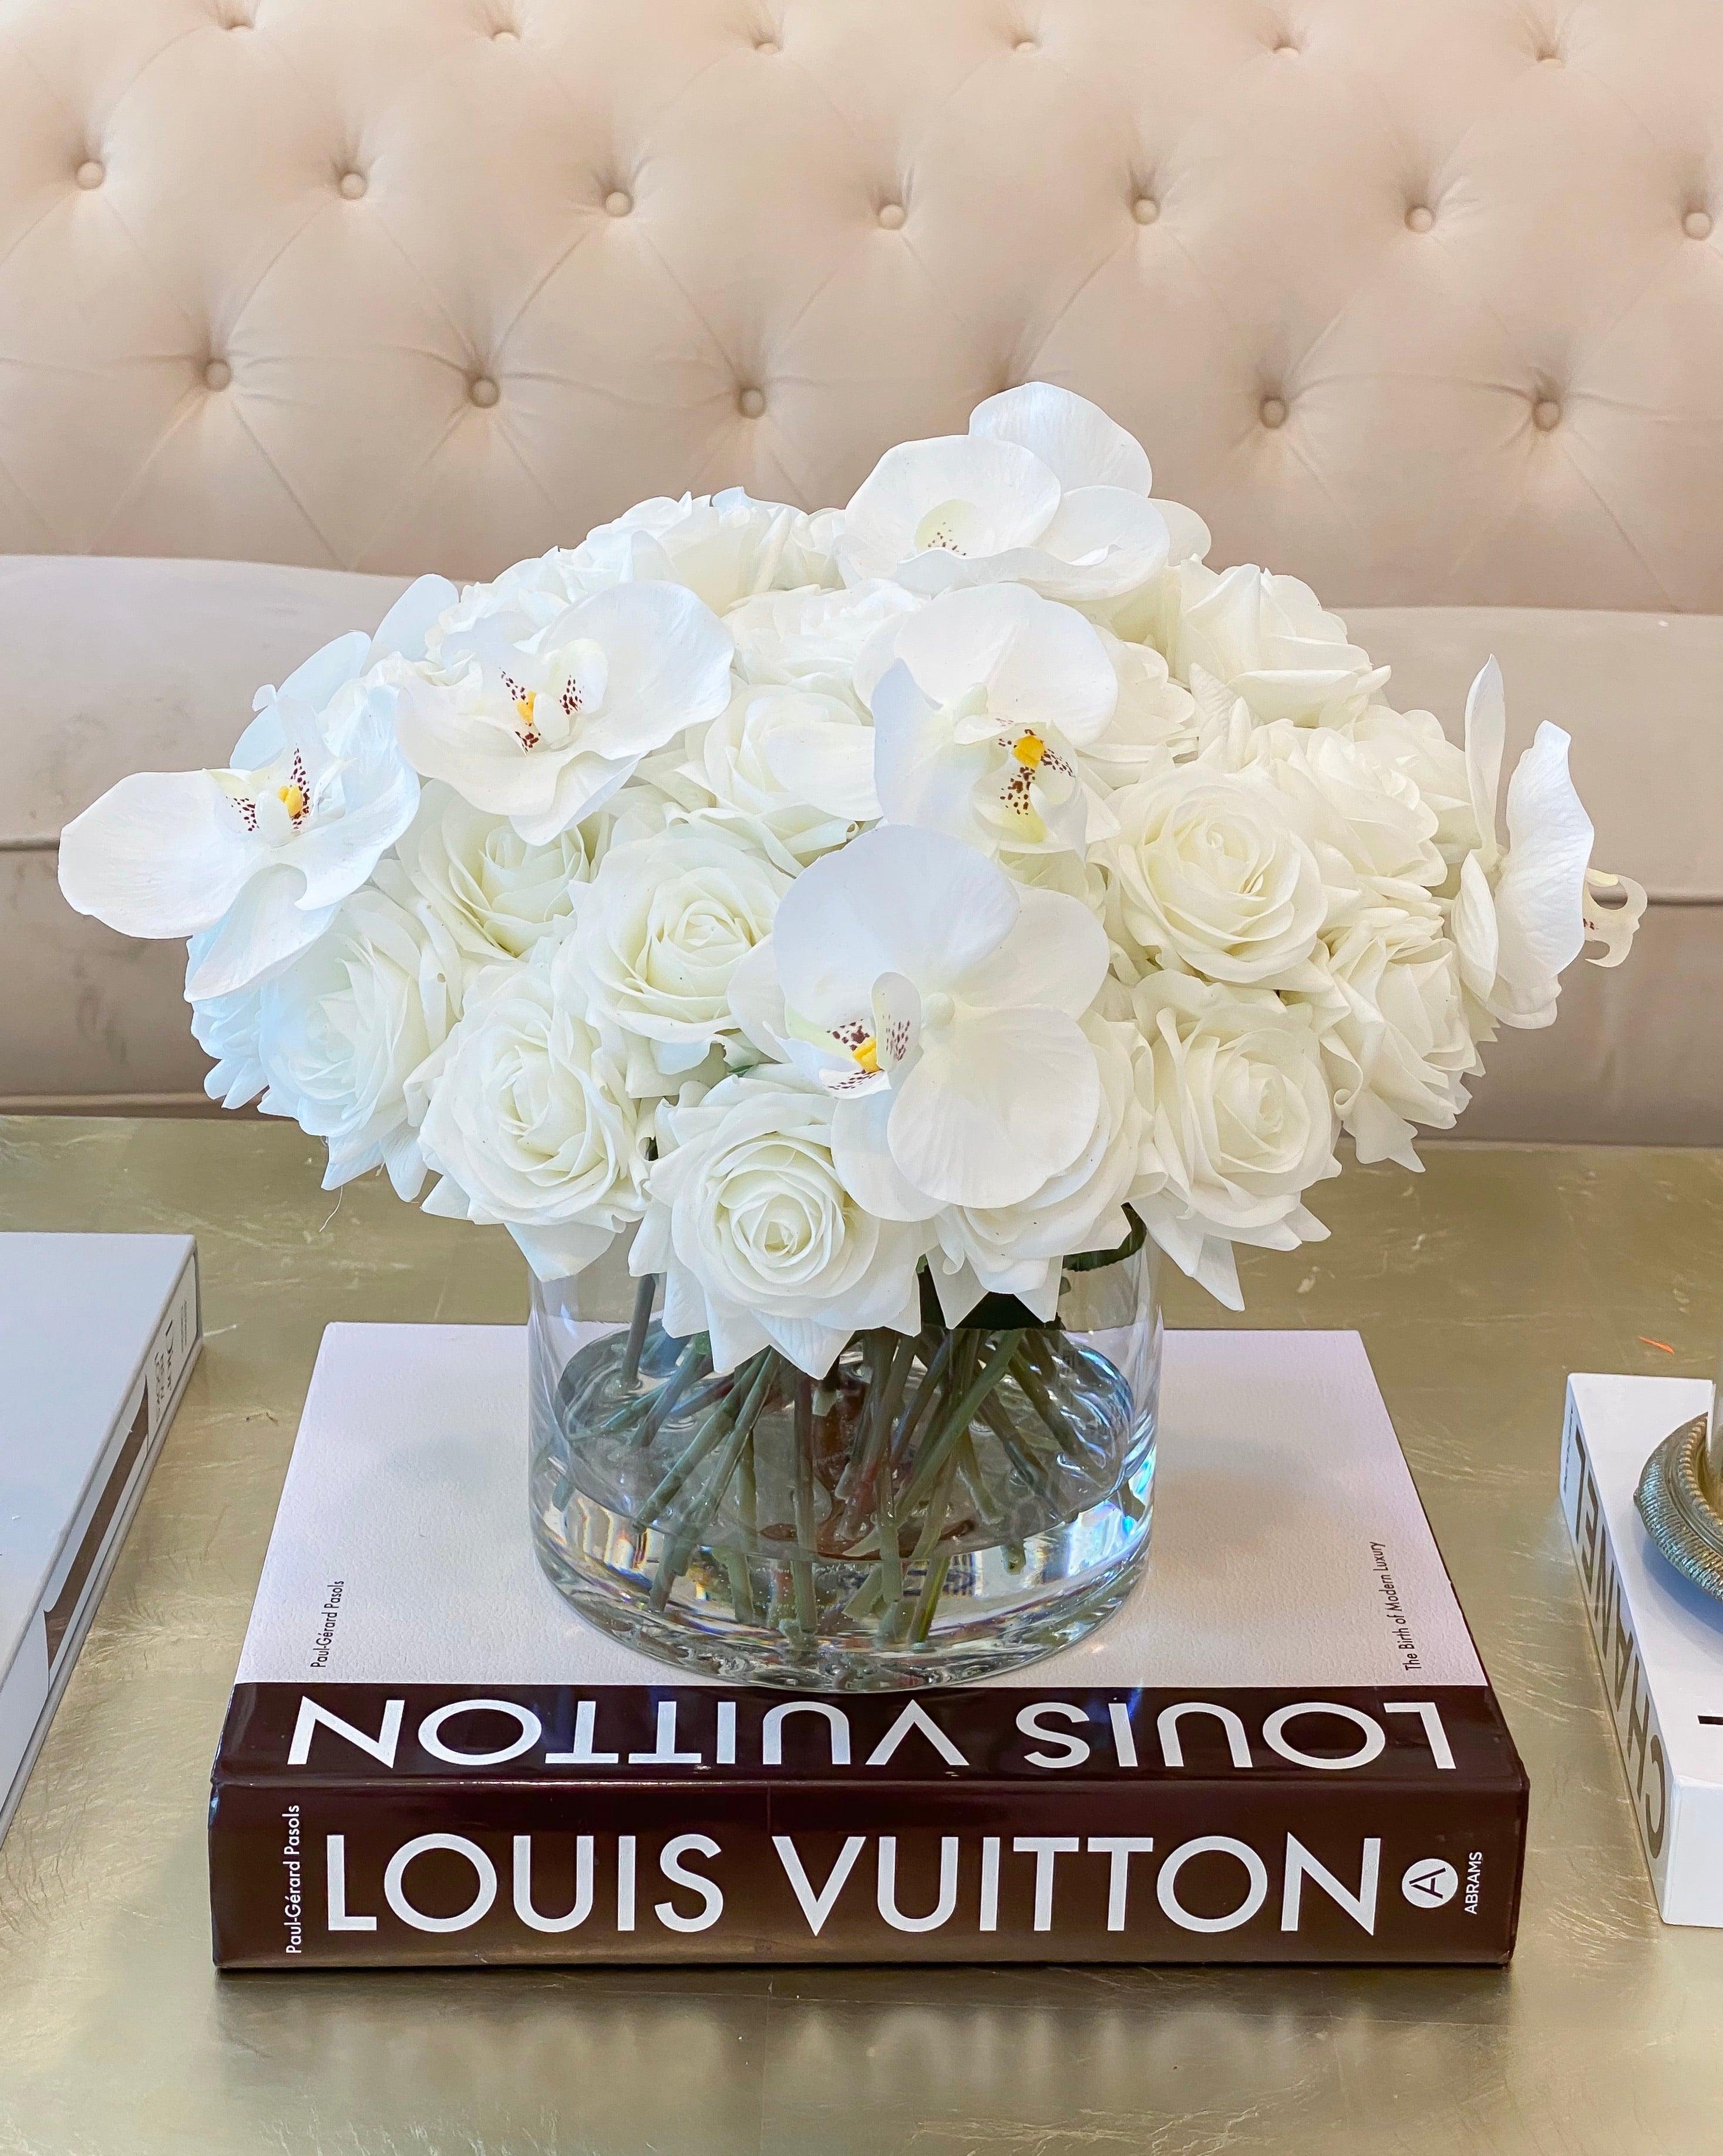 NEW Louis Vuitton : The Birth of Modern Luxury by Paul-Gerard